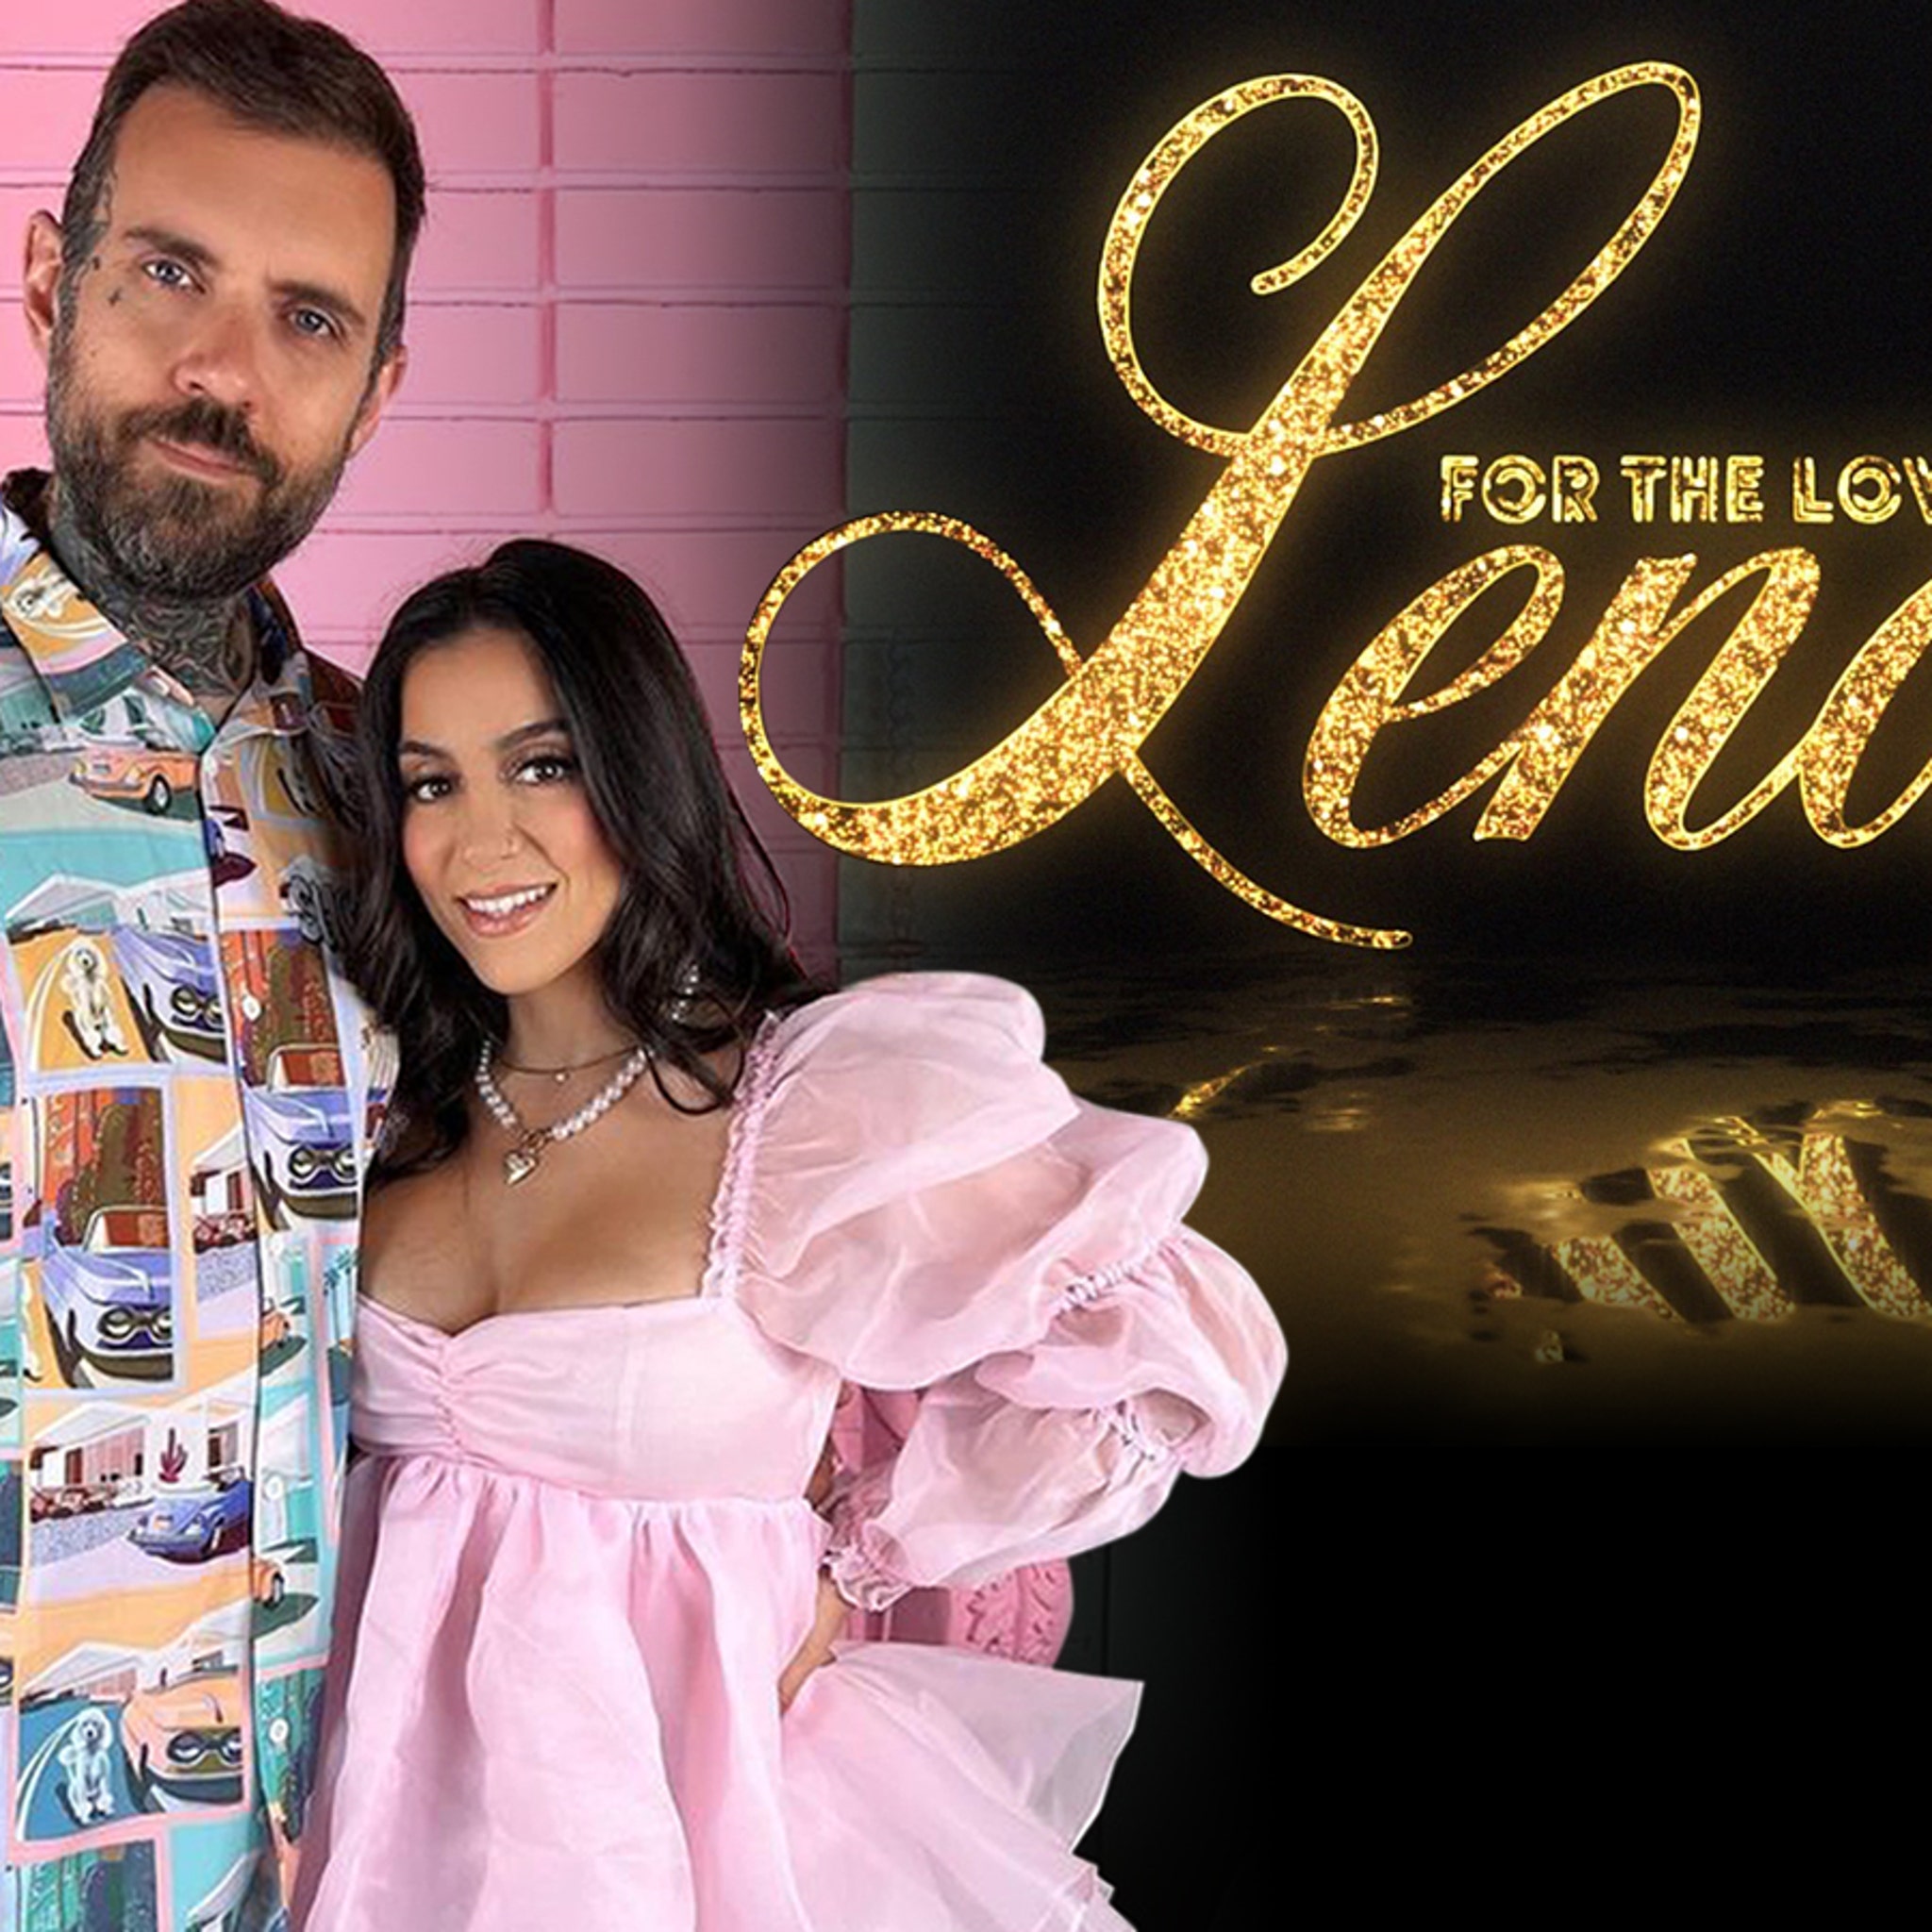 Adam22 and Lena the Plug Launching New Reality Show